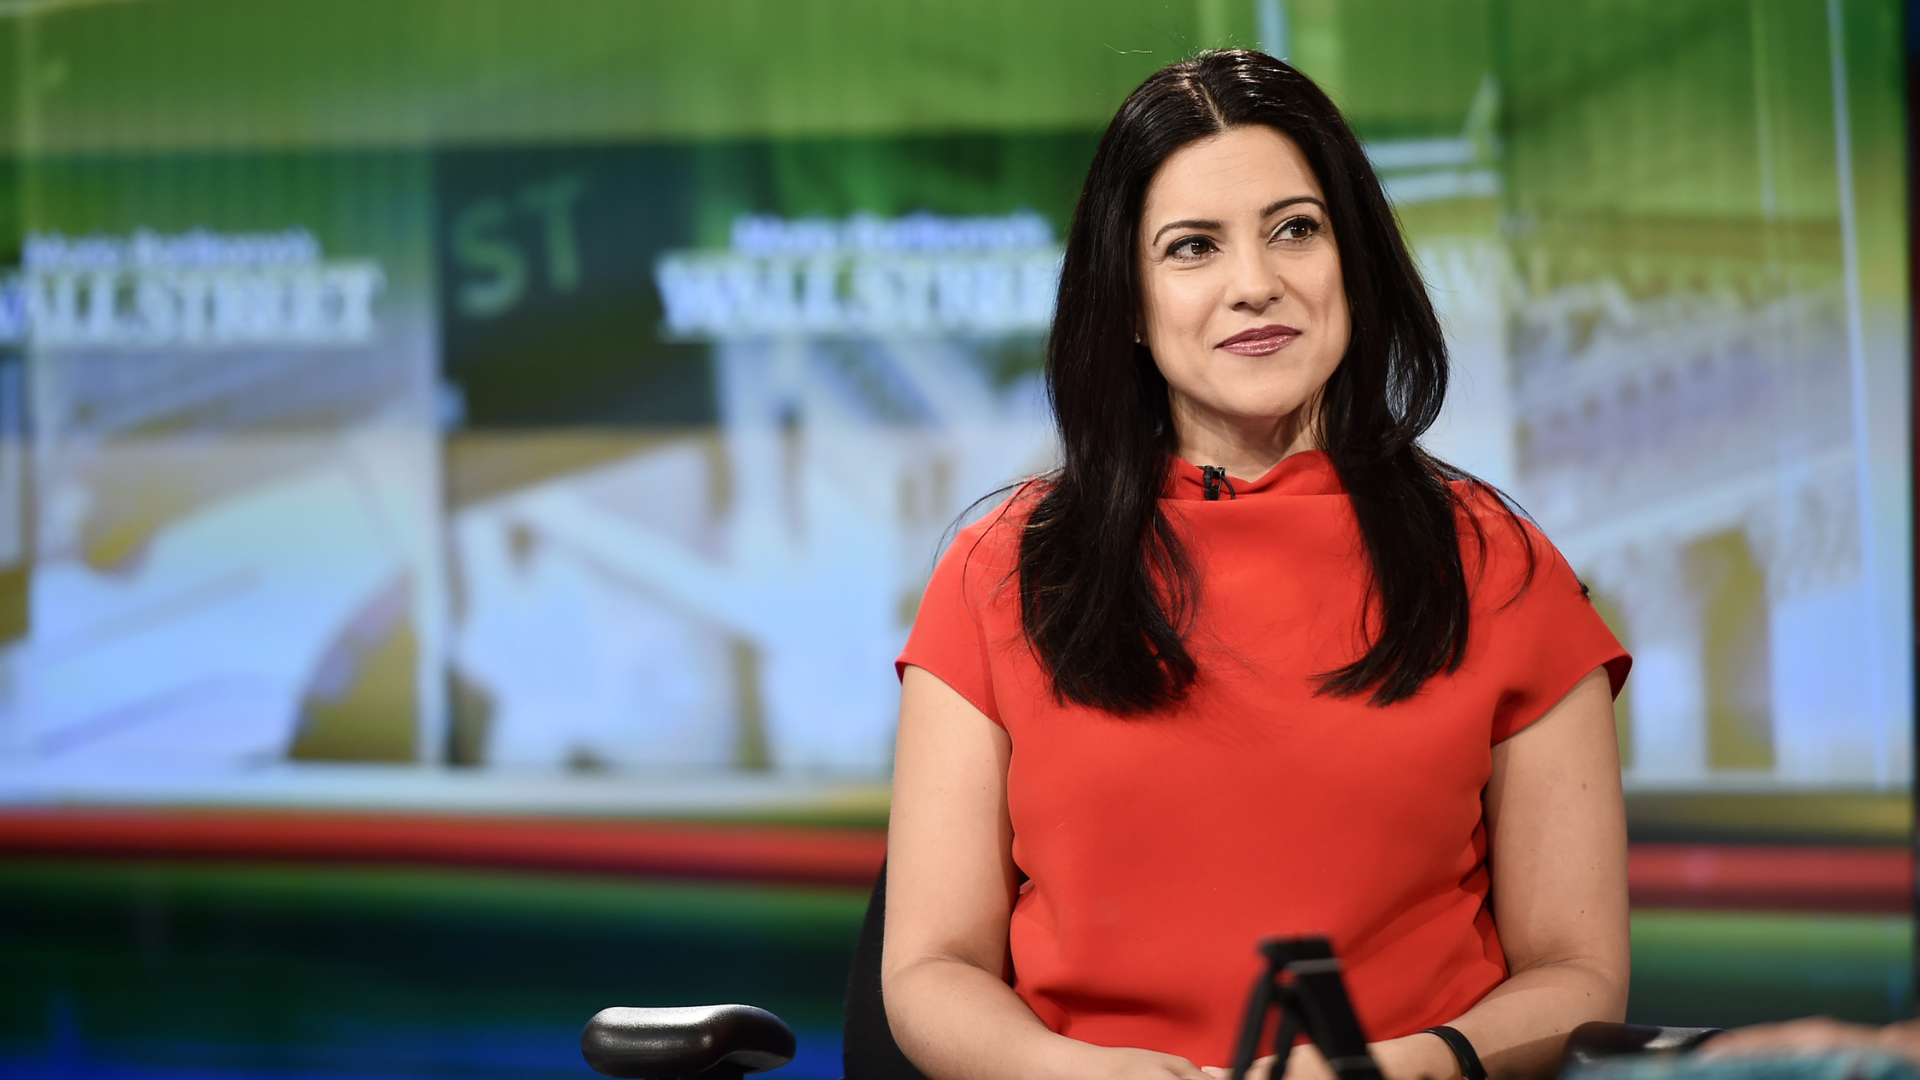 Reshma Saujani on a news show, wearing a red, short sleeved top, with long brown hair. There is a green news screen in the background.